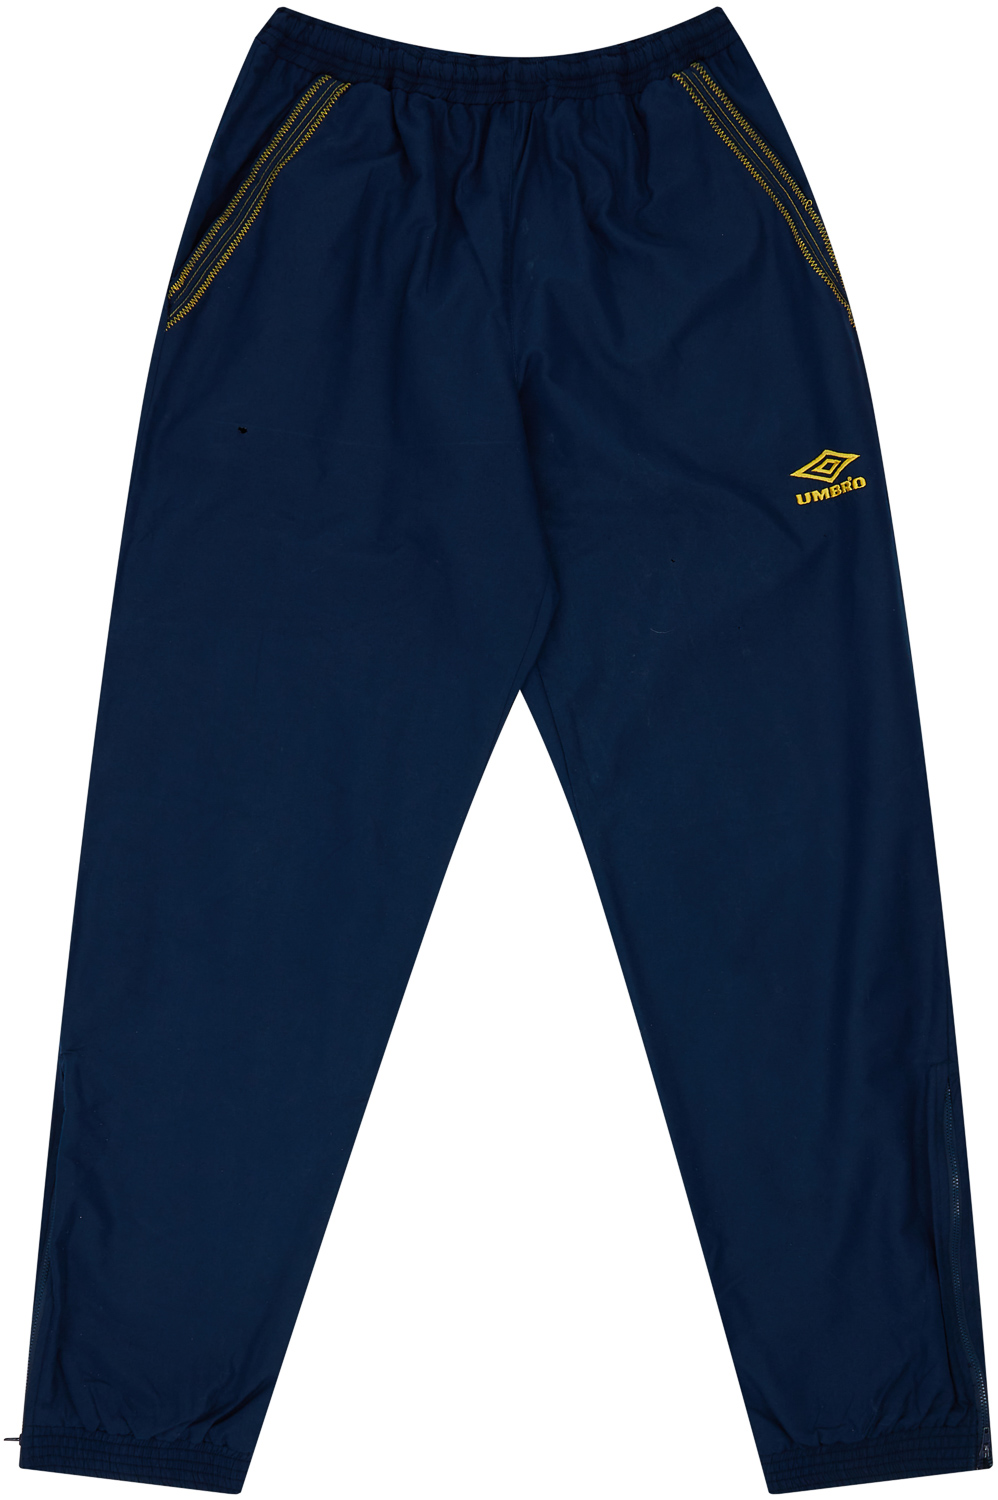 Slide View: 1: Umbro Retro Tapered Track Pant | Mens clothing styles, Umbro,  Mens outfits